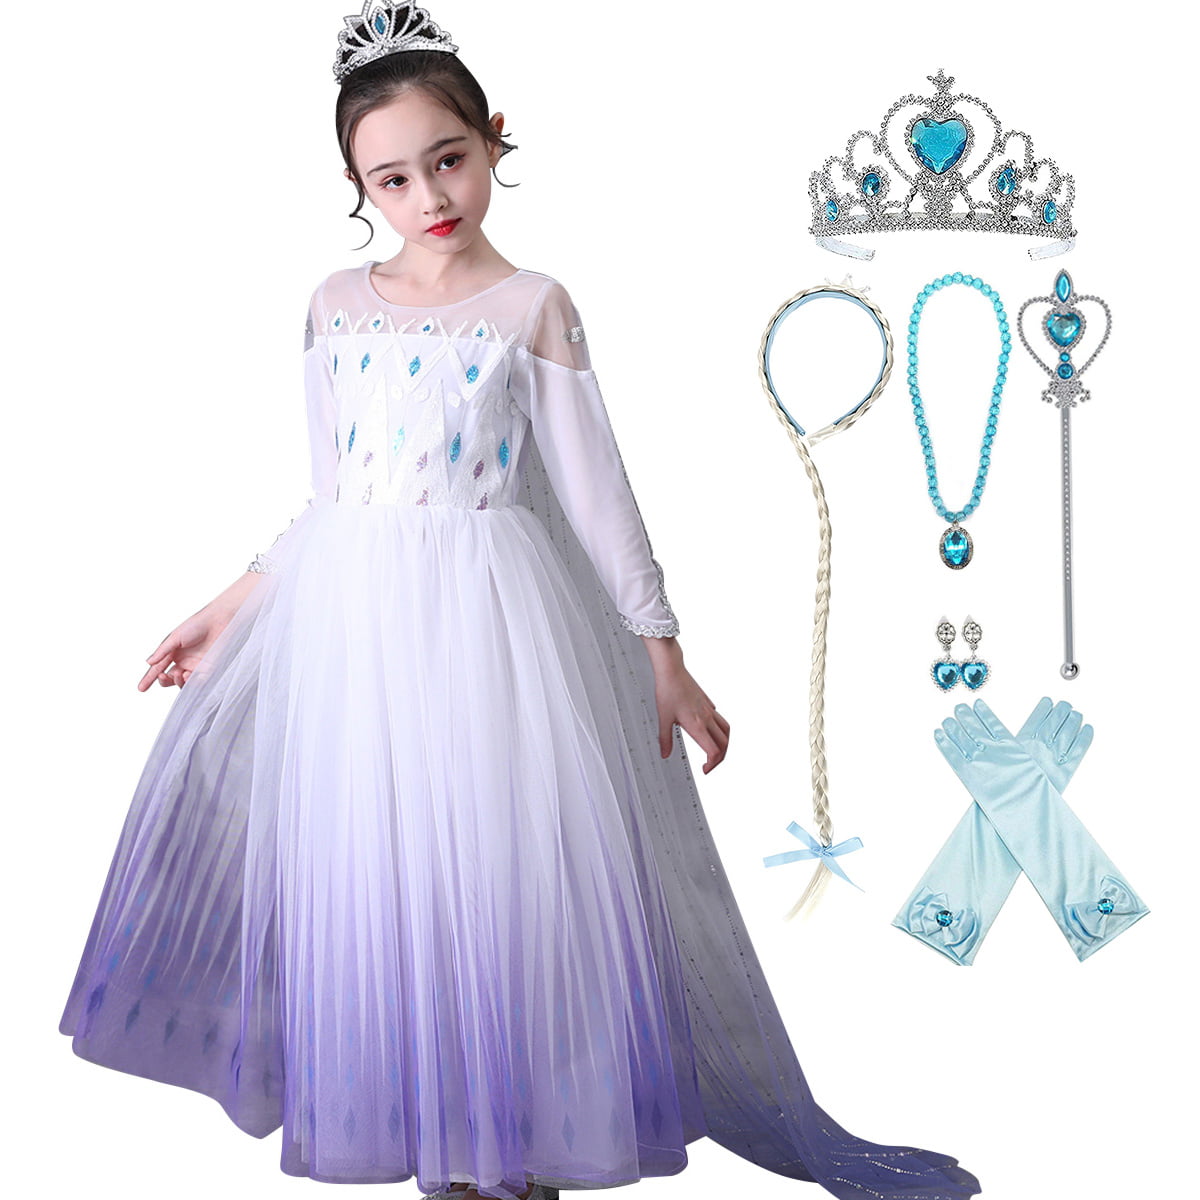 Princess Costume Dress Up Clothes for Girls Fancy Party Christmas Dress with Unique Accessories 